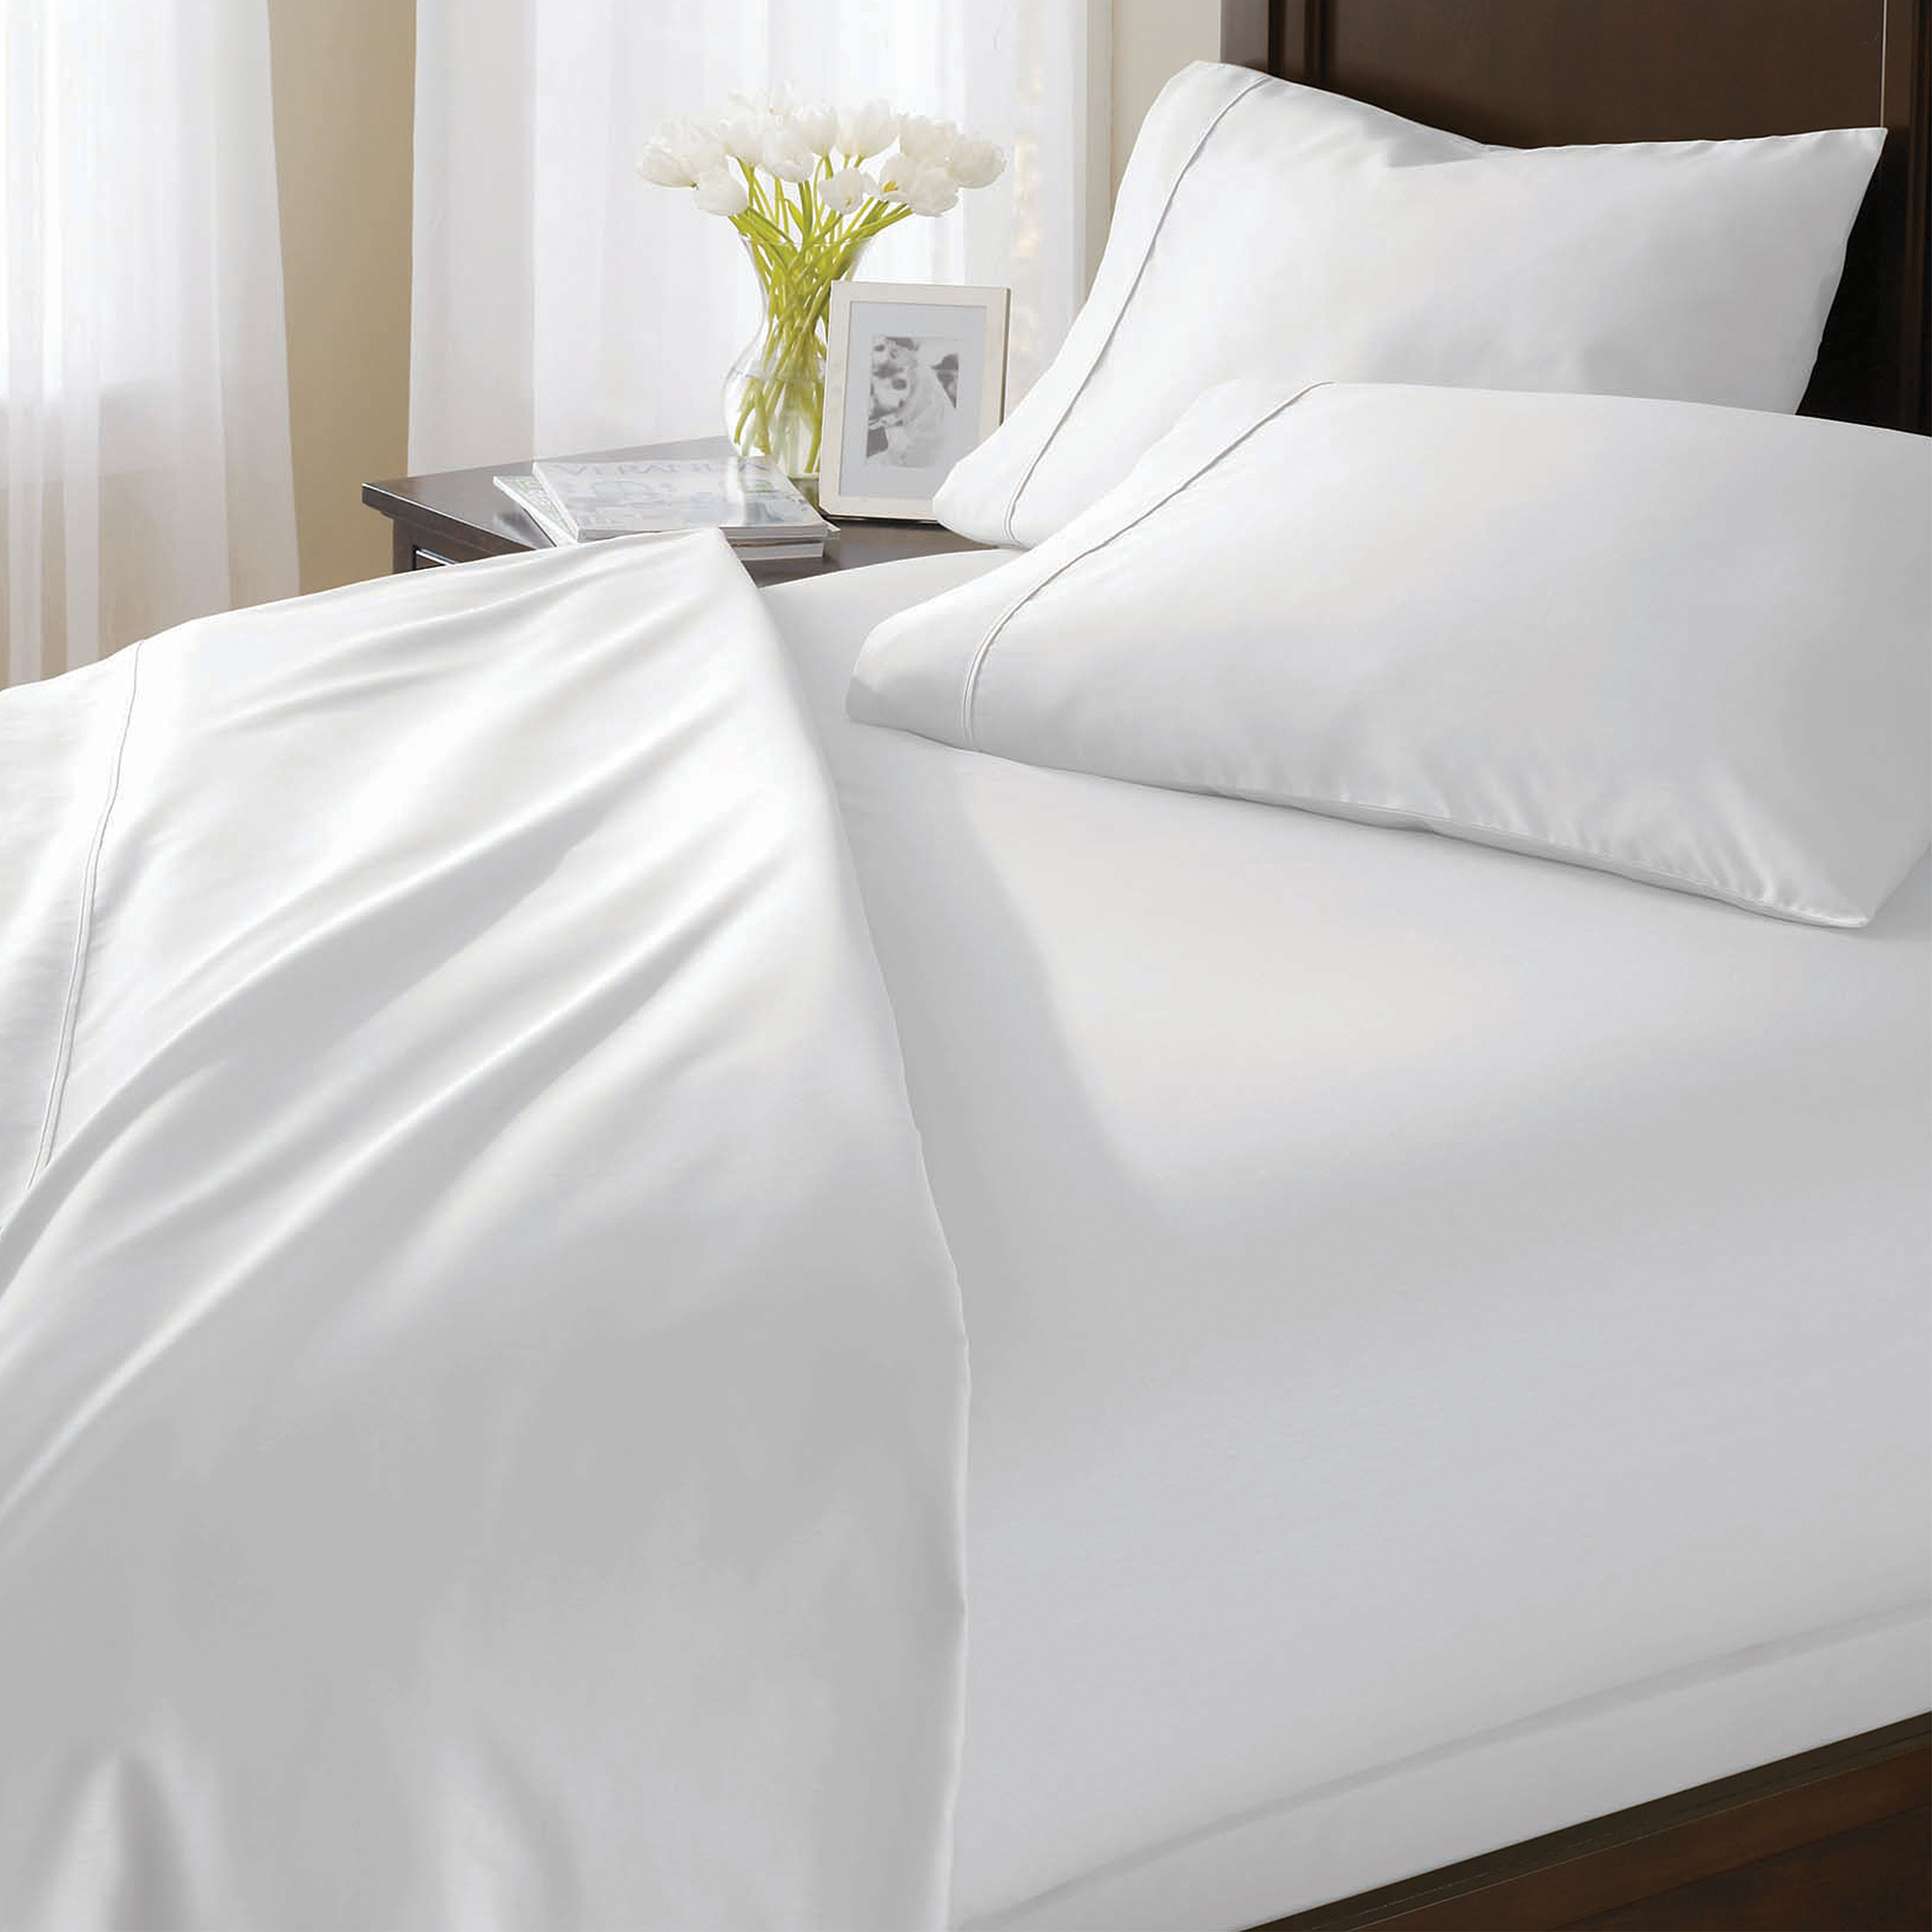 Better Homes and Gardens 400 Thread Count Egyptian Cotton Sheet Set - image 2 of 2